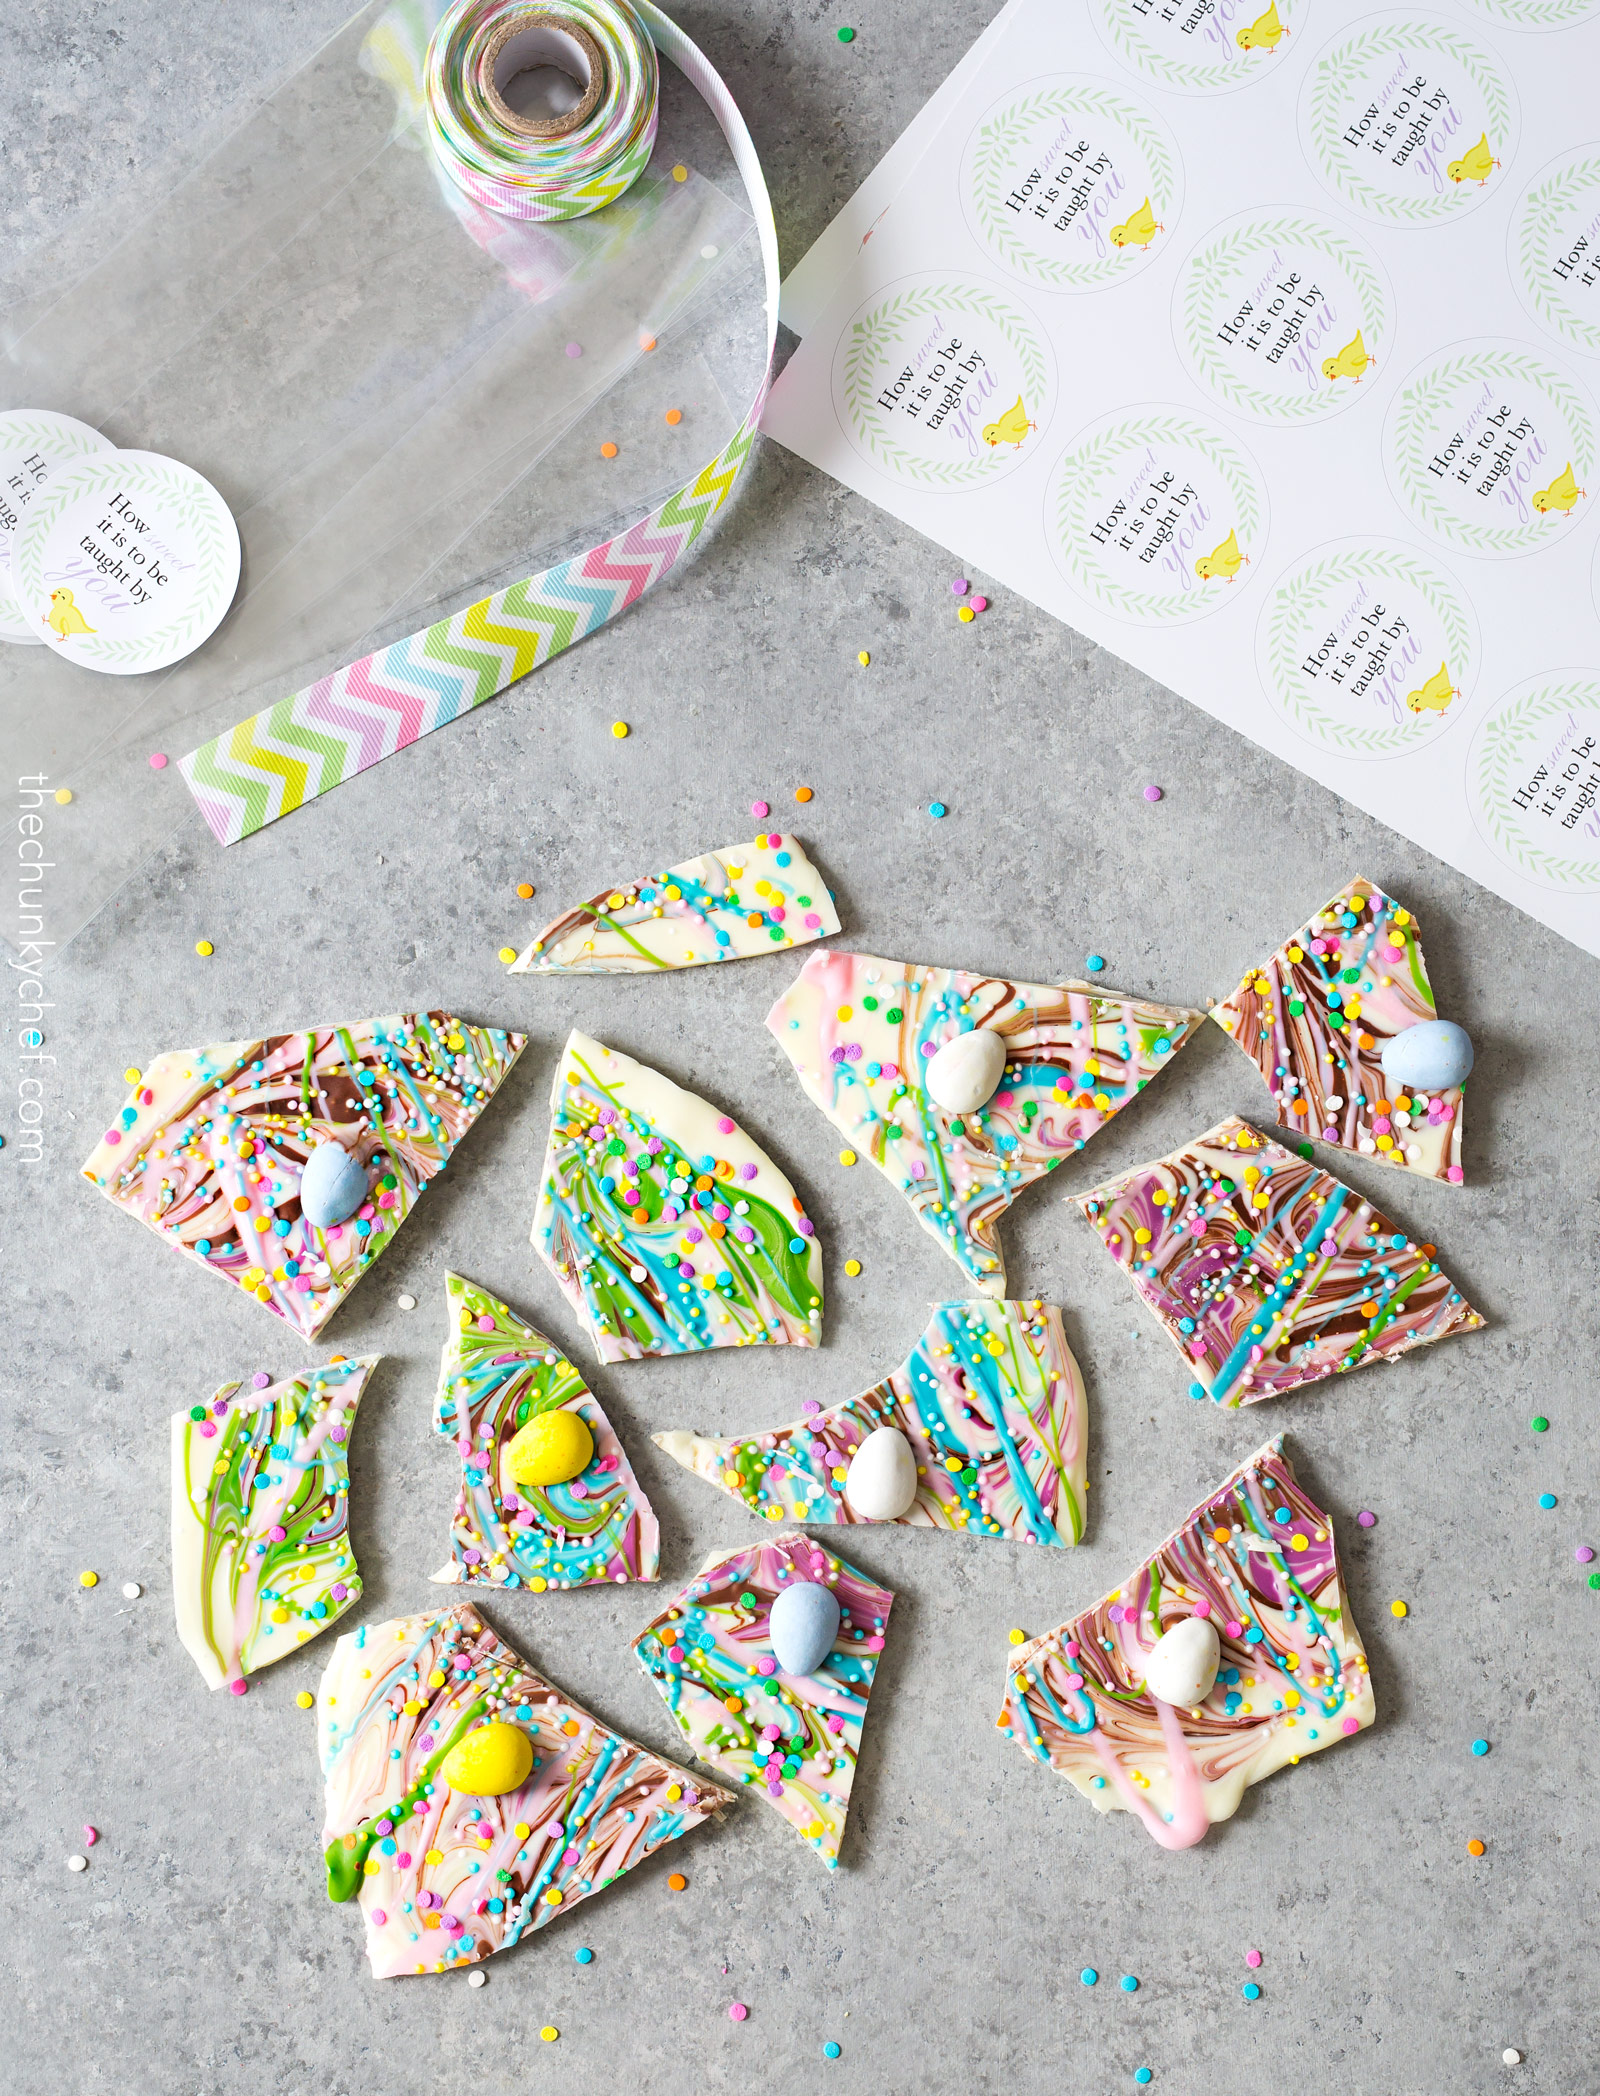 Brownie Batter White Chocolate Bark | A fun no bake bark dessert, made with white chocolate swirled together with milk chocolate brownie batter, and decorated in fun Spring colors! Easily customizable to any holiday and makes a great homemade gift! | http://thechunkychef.com